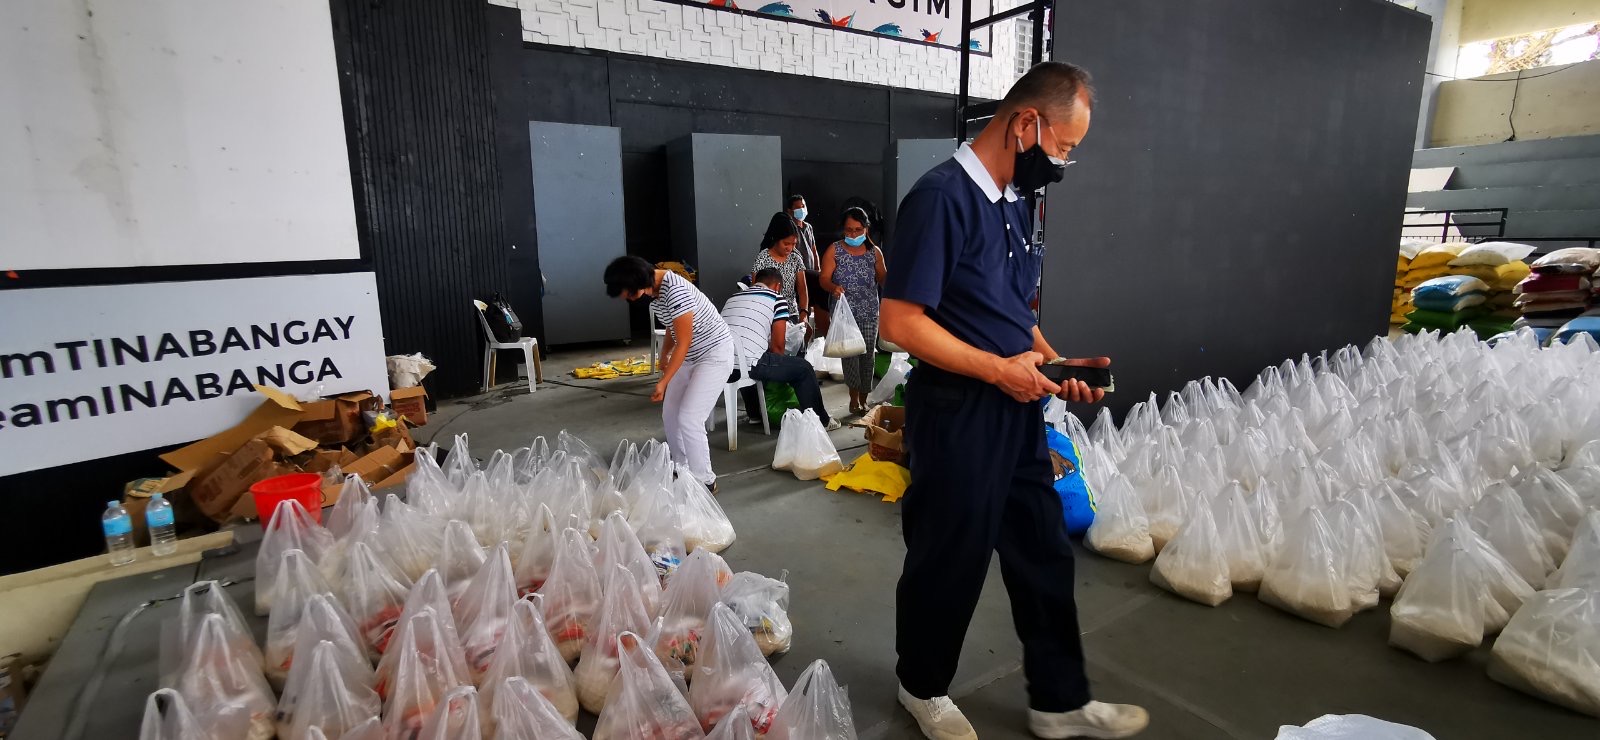 A Tzu Chi volunteer walks past bags of relief aid provided by the local government unit.【Photo by Johnny Kwok】